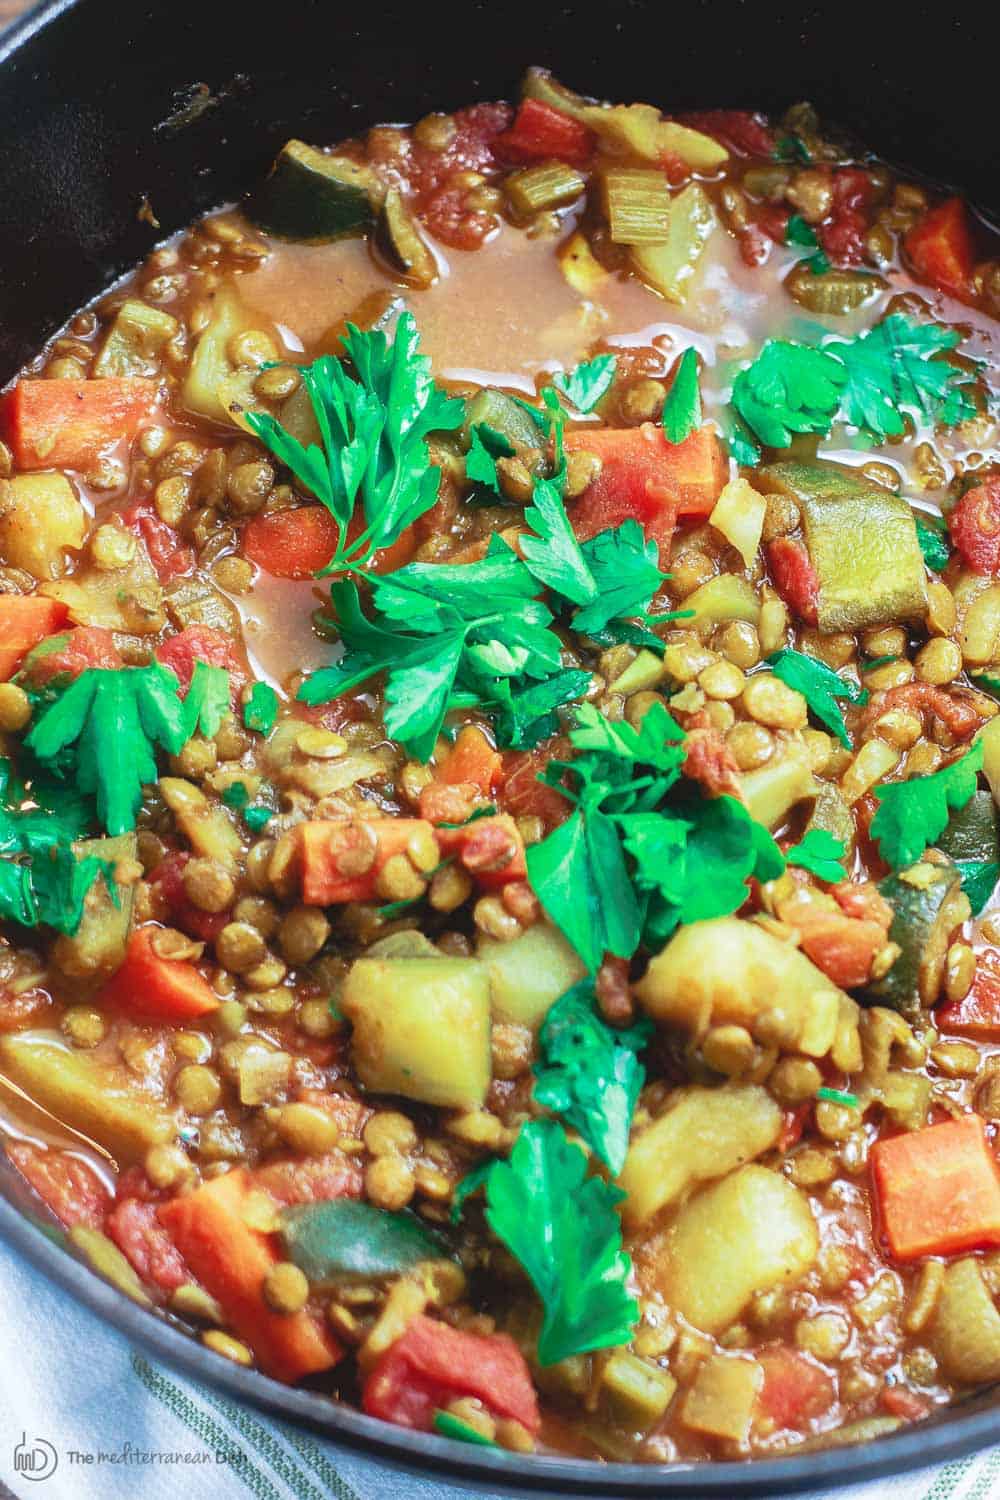 Chunky Vegan Lentil Soup Recipe | The Mediterranean Dish. Mediterranean style lentil soup with vegetables, warm spices, and fresh herbs. Anything but an ordinary lentil soup. Try this heart-warming, nutrition packed soup, and you'll be coming for more. Recipe via TheMediterraneanDish.com